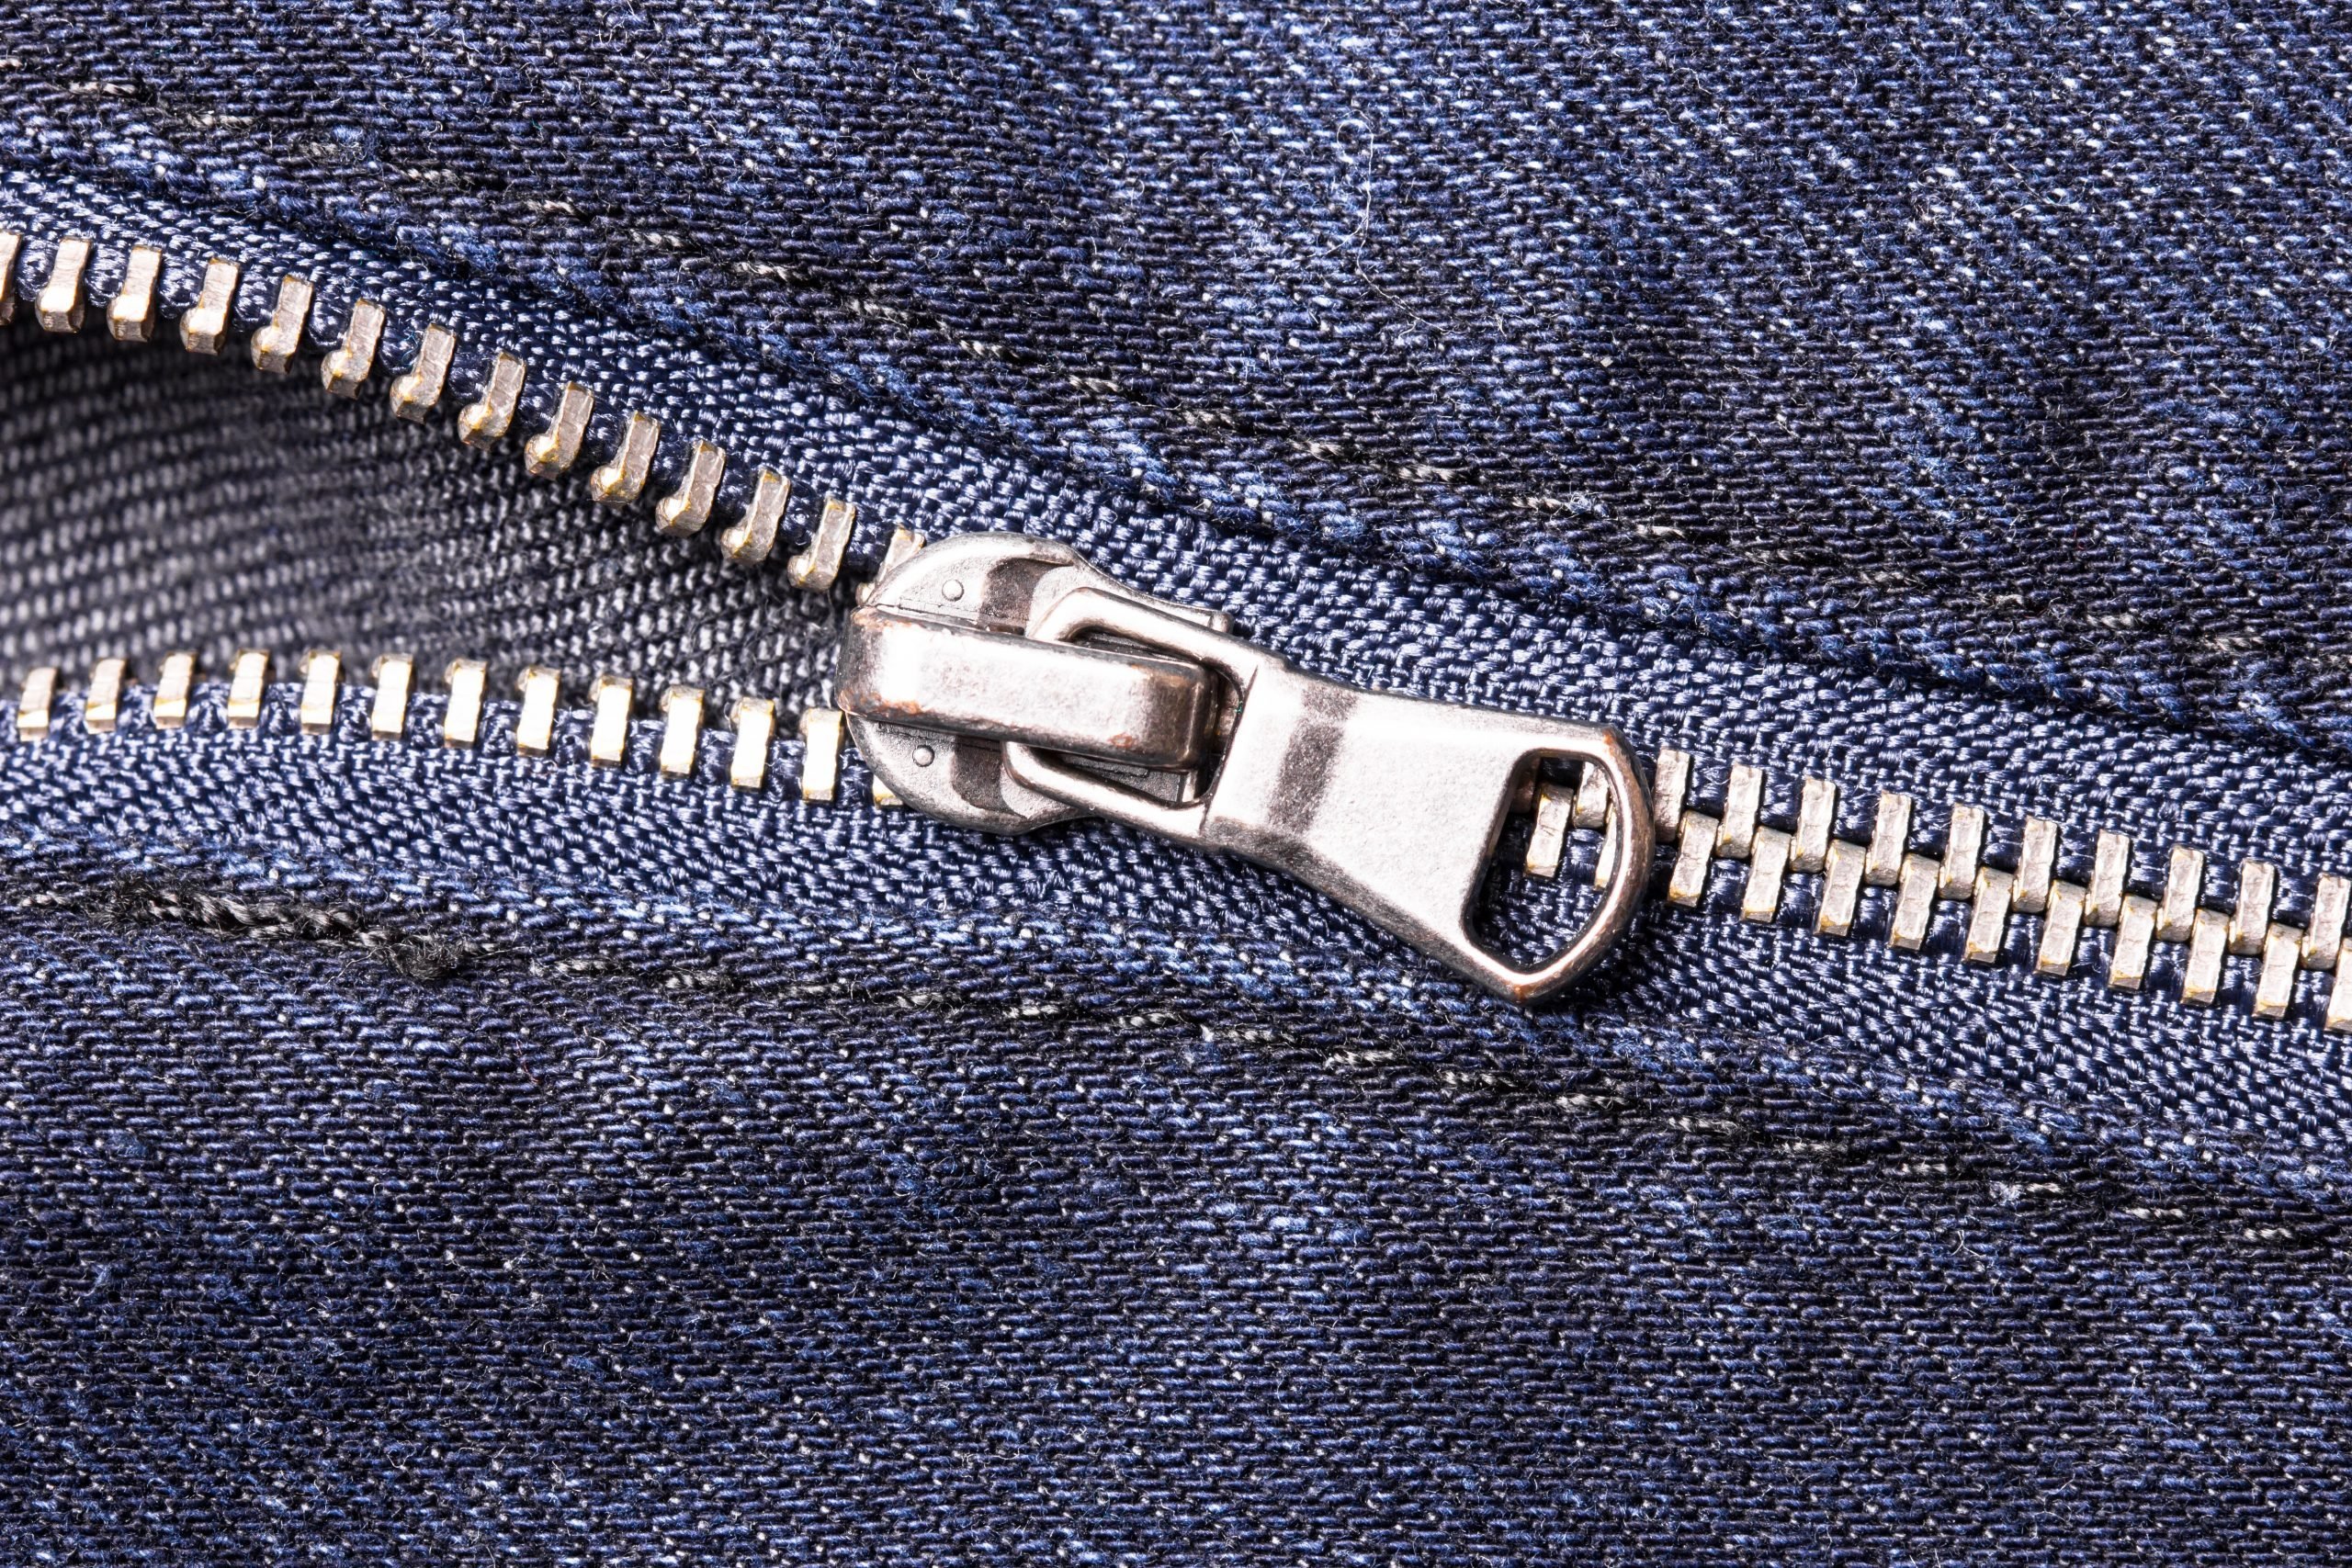 Is it possible to convert a zipper with a stop at the bottom to a